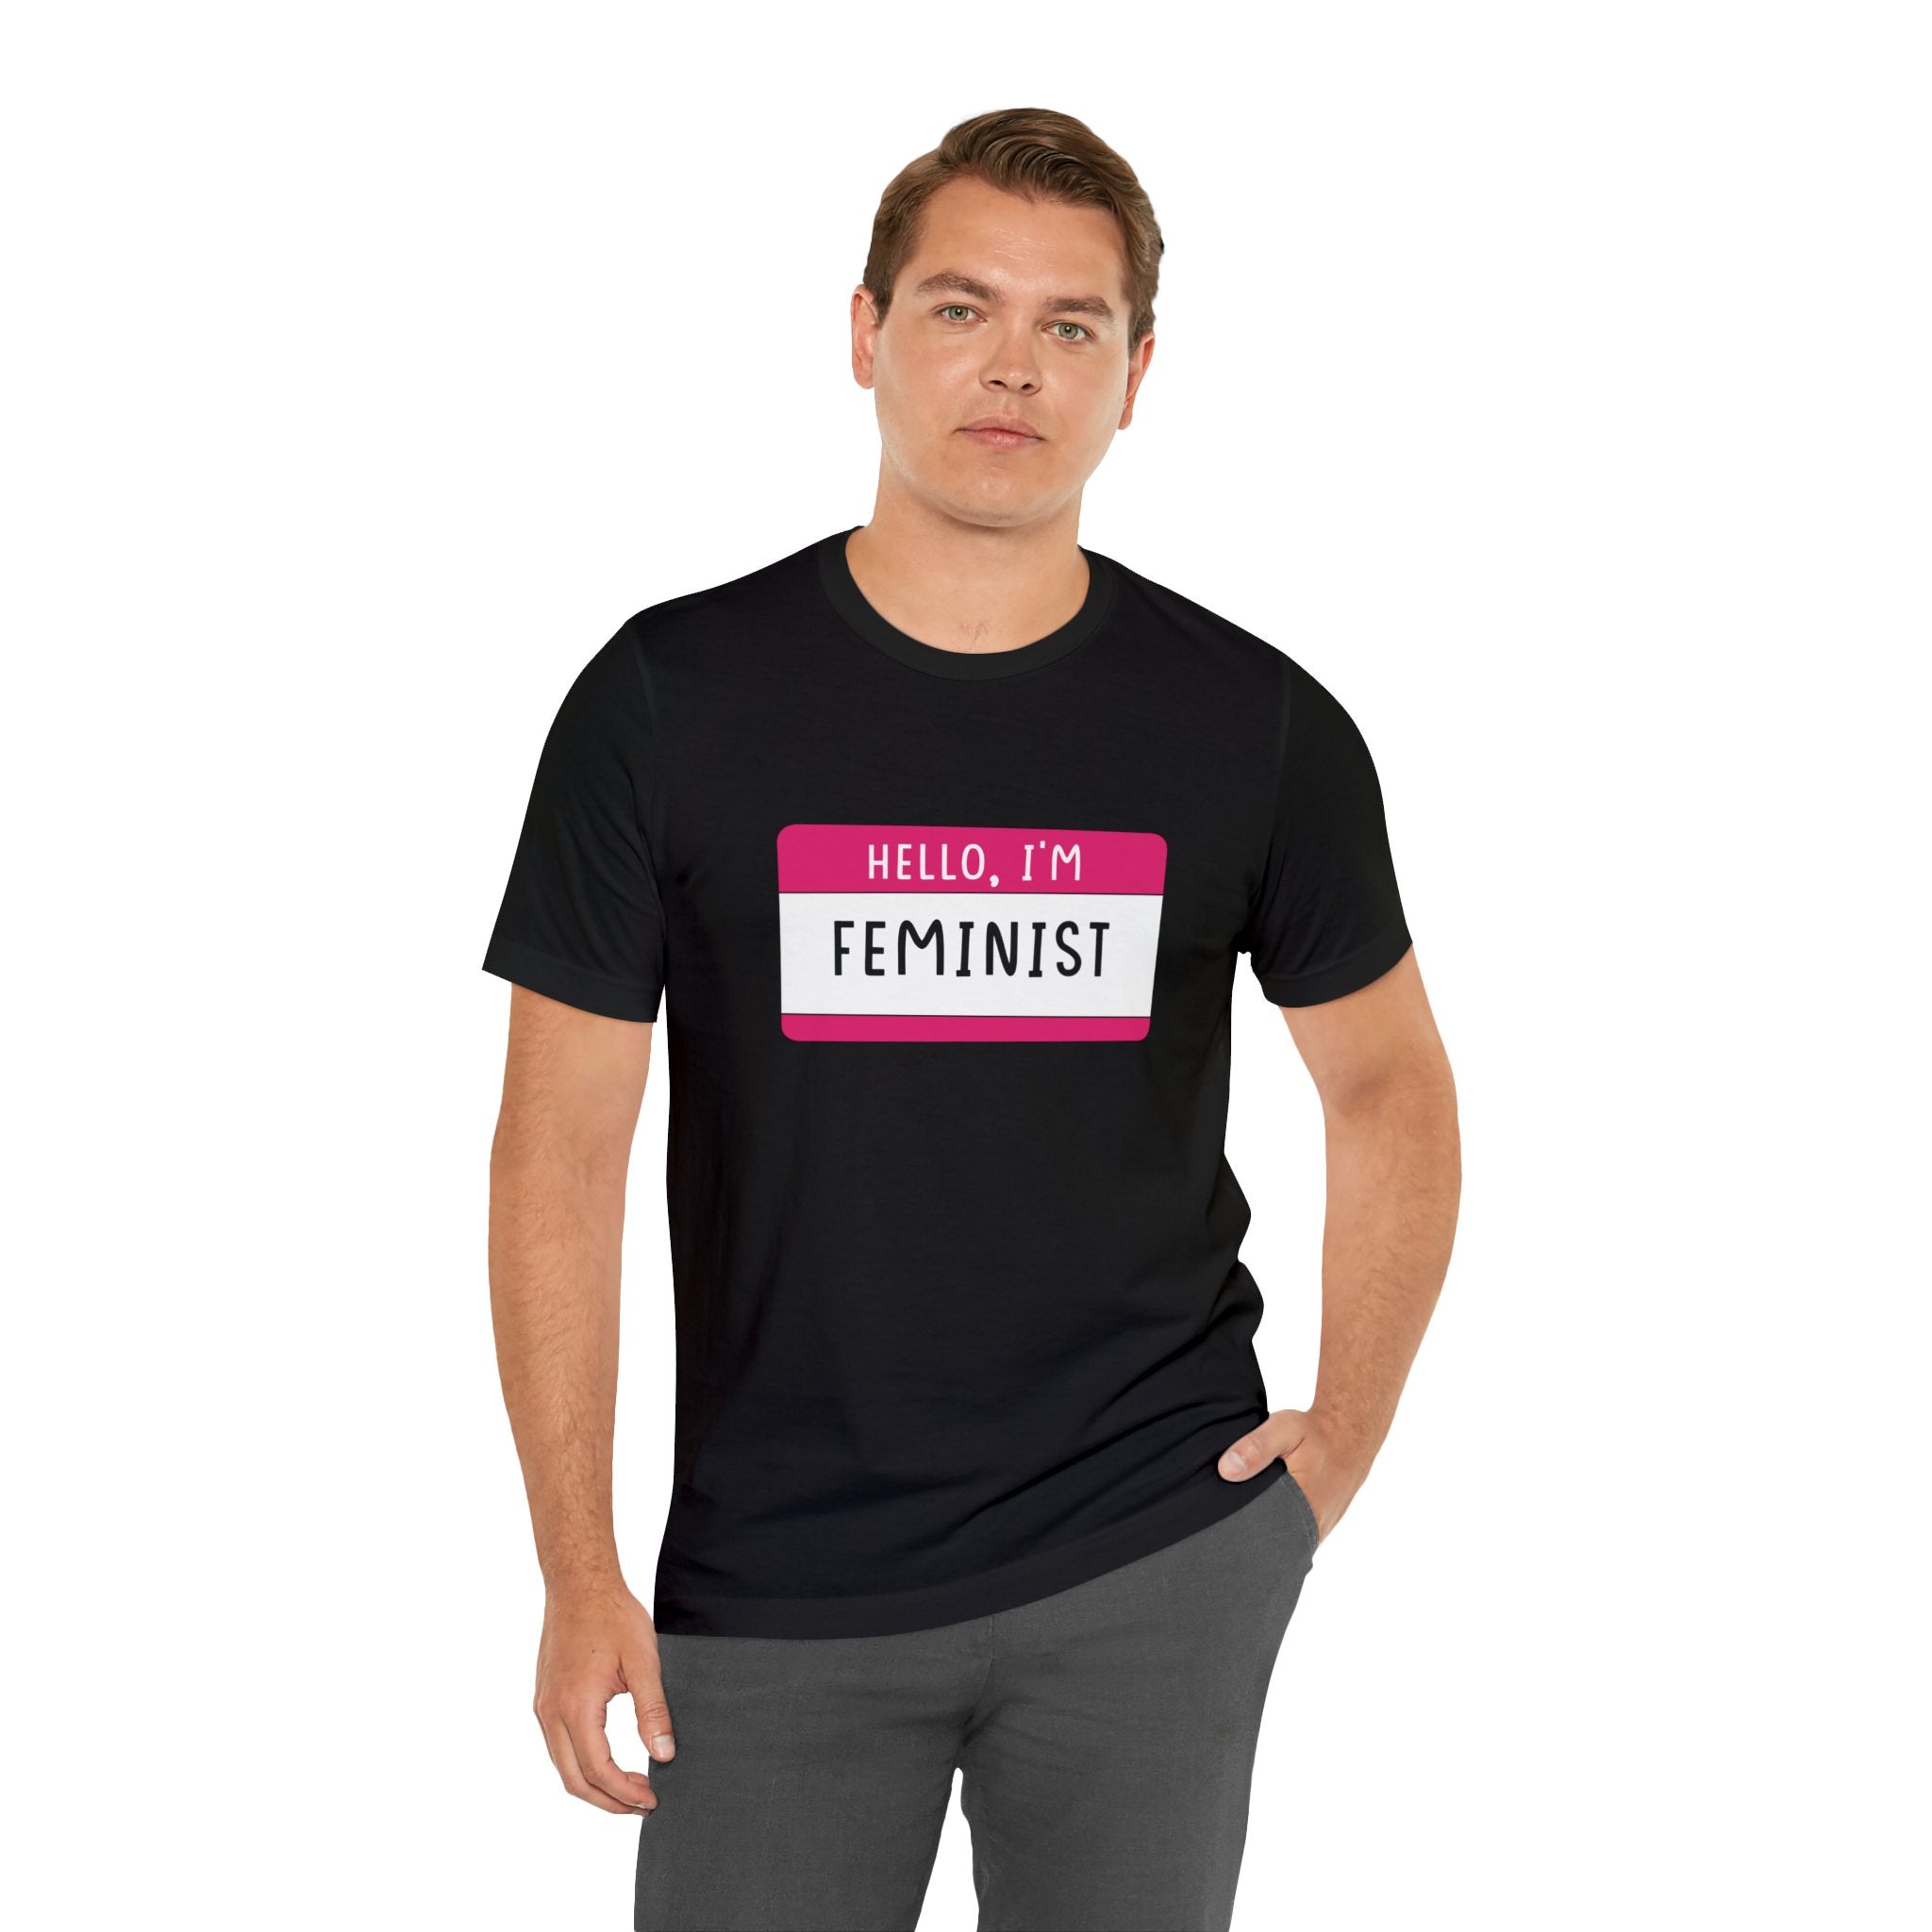 Man in a black Hello, I'm Feminist T-Shirt with "hello, i'm feminist" printed in white and pink on the front, standing against a plain background.